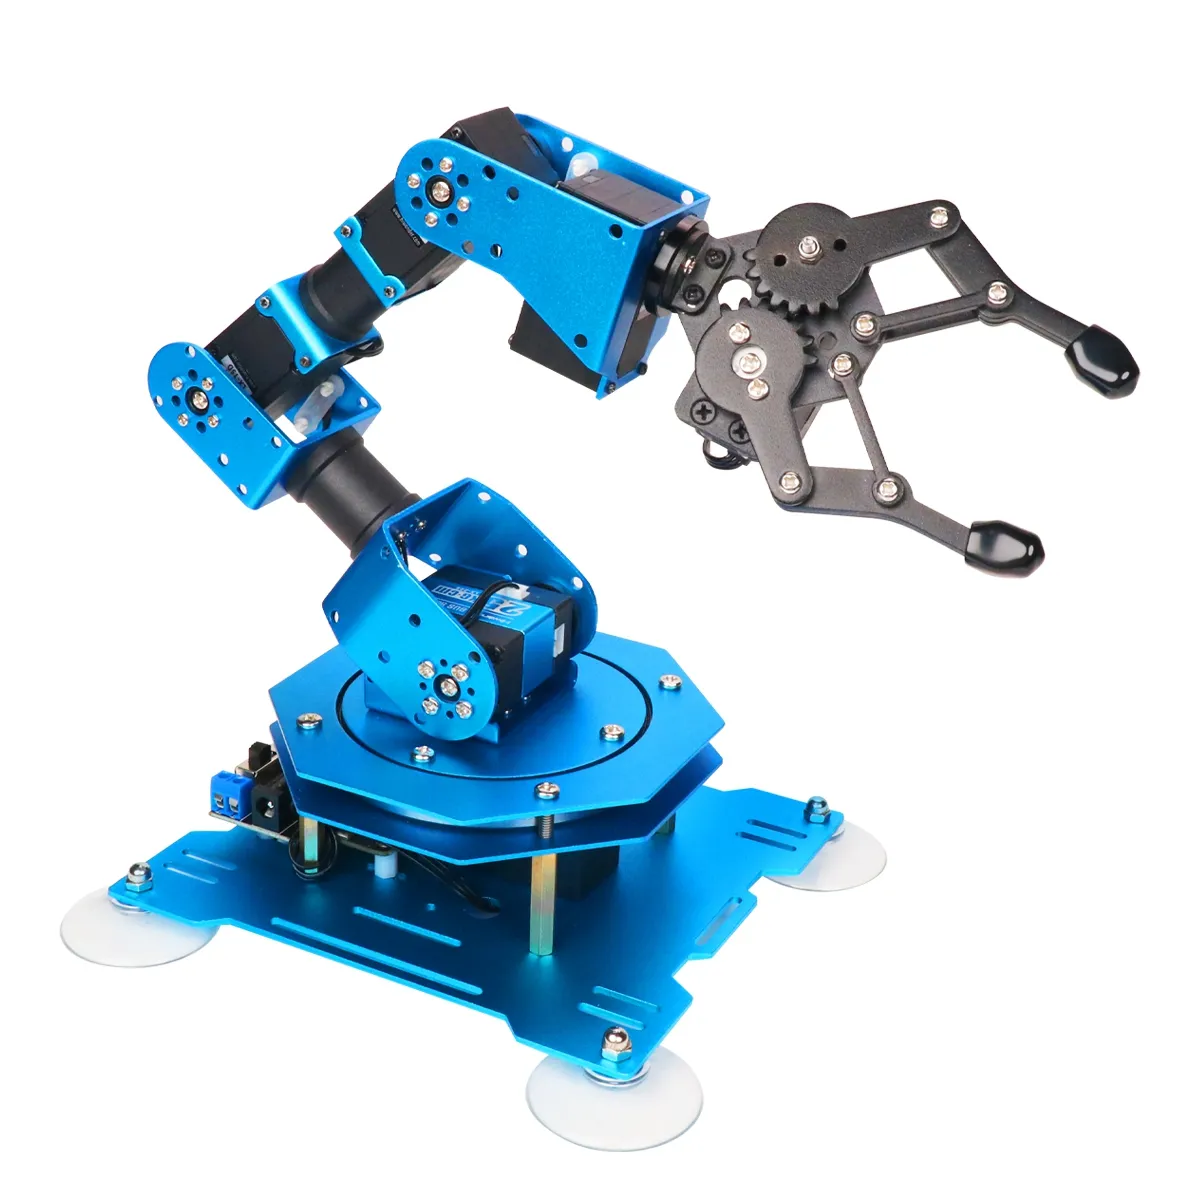 Hiwonder New xArm 1S 6 DOF Robotic Arm for Programming with Detailed Tutorial Education